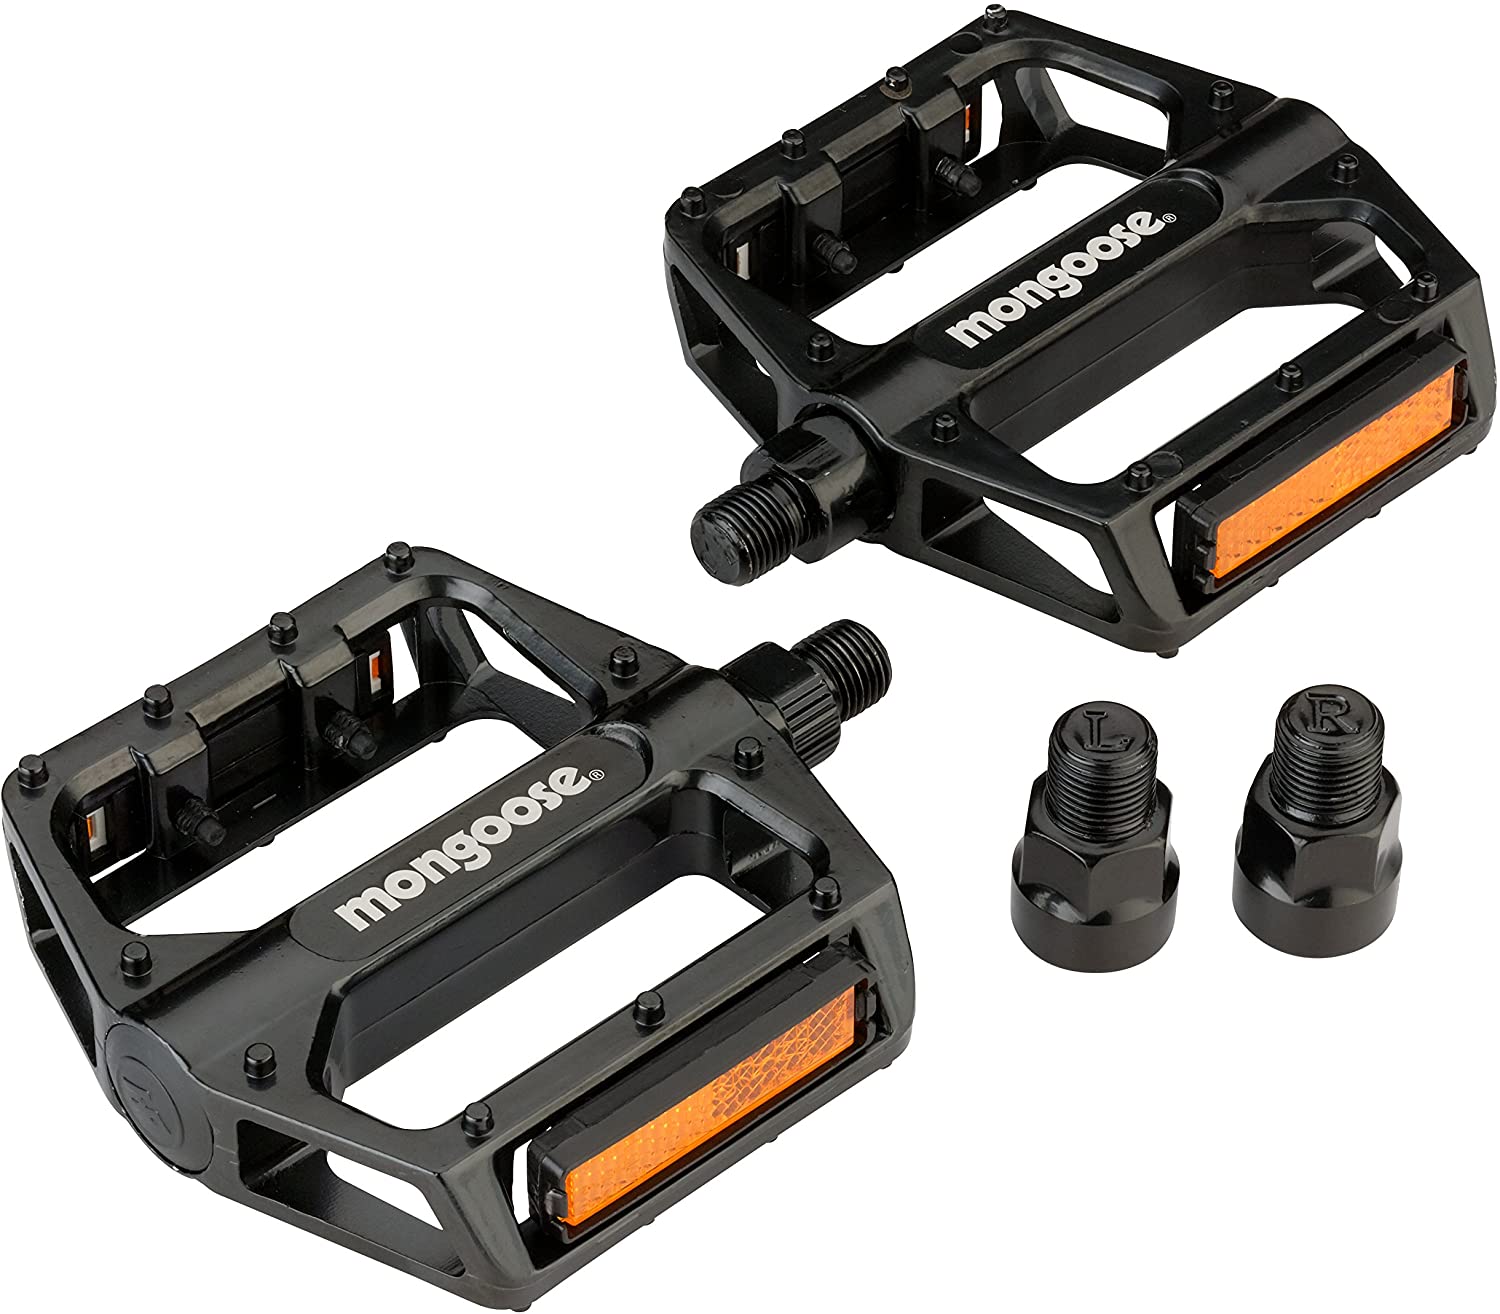 Mountain bike flat pedals are still a great option for bikers and can even be fitted with toe clips depending on the model.